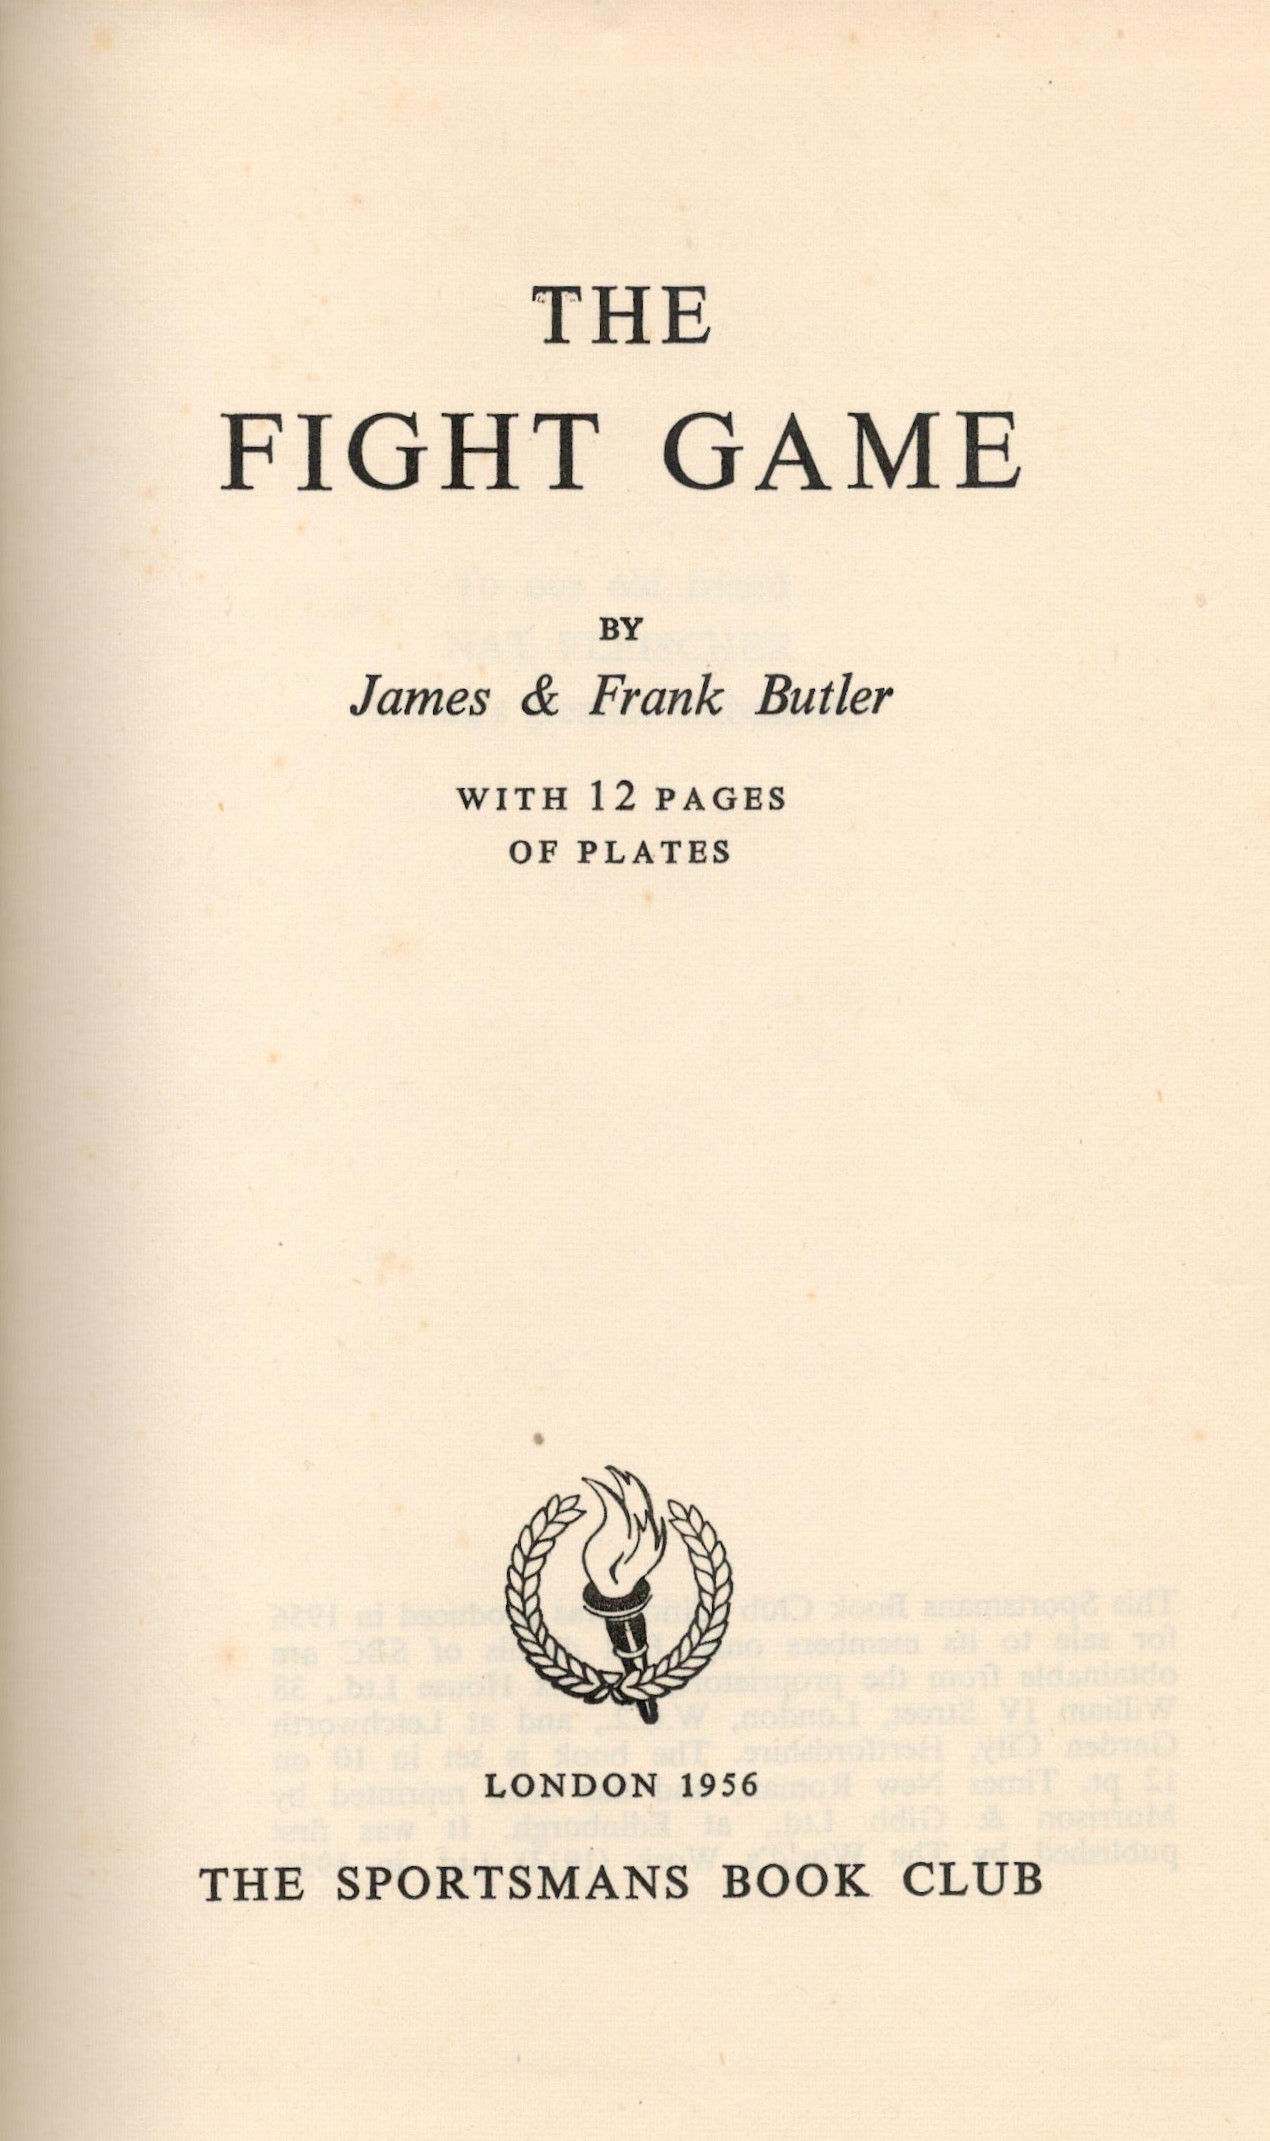 The Fight Game by James and Frank Butler Hardback Book 1956 Second Edition published by The - Image 2 of 3